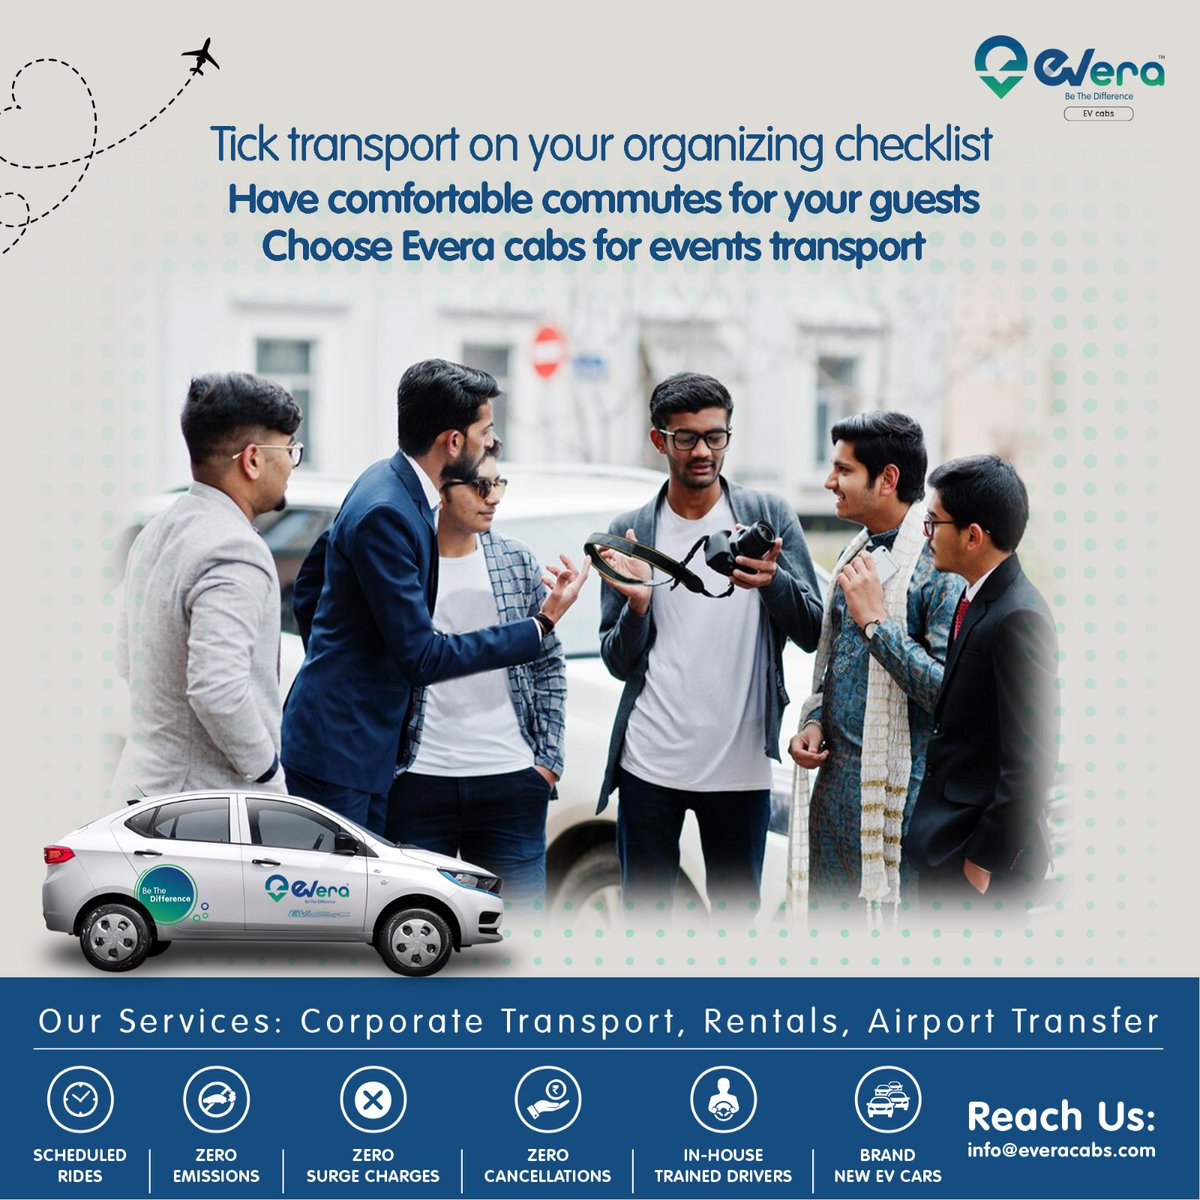 Check off transportation from your event planning list! Ensure comfortable commutes for your guests with @EveraCabs. #EventTransport #GuestComfort